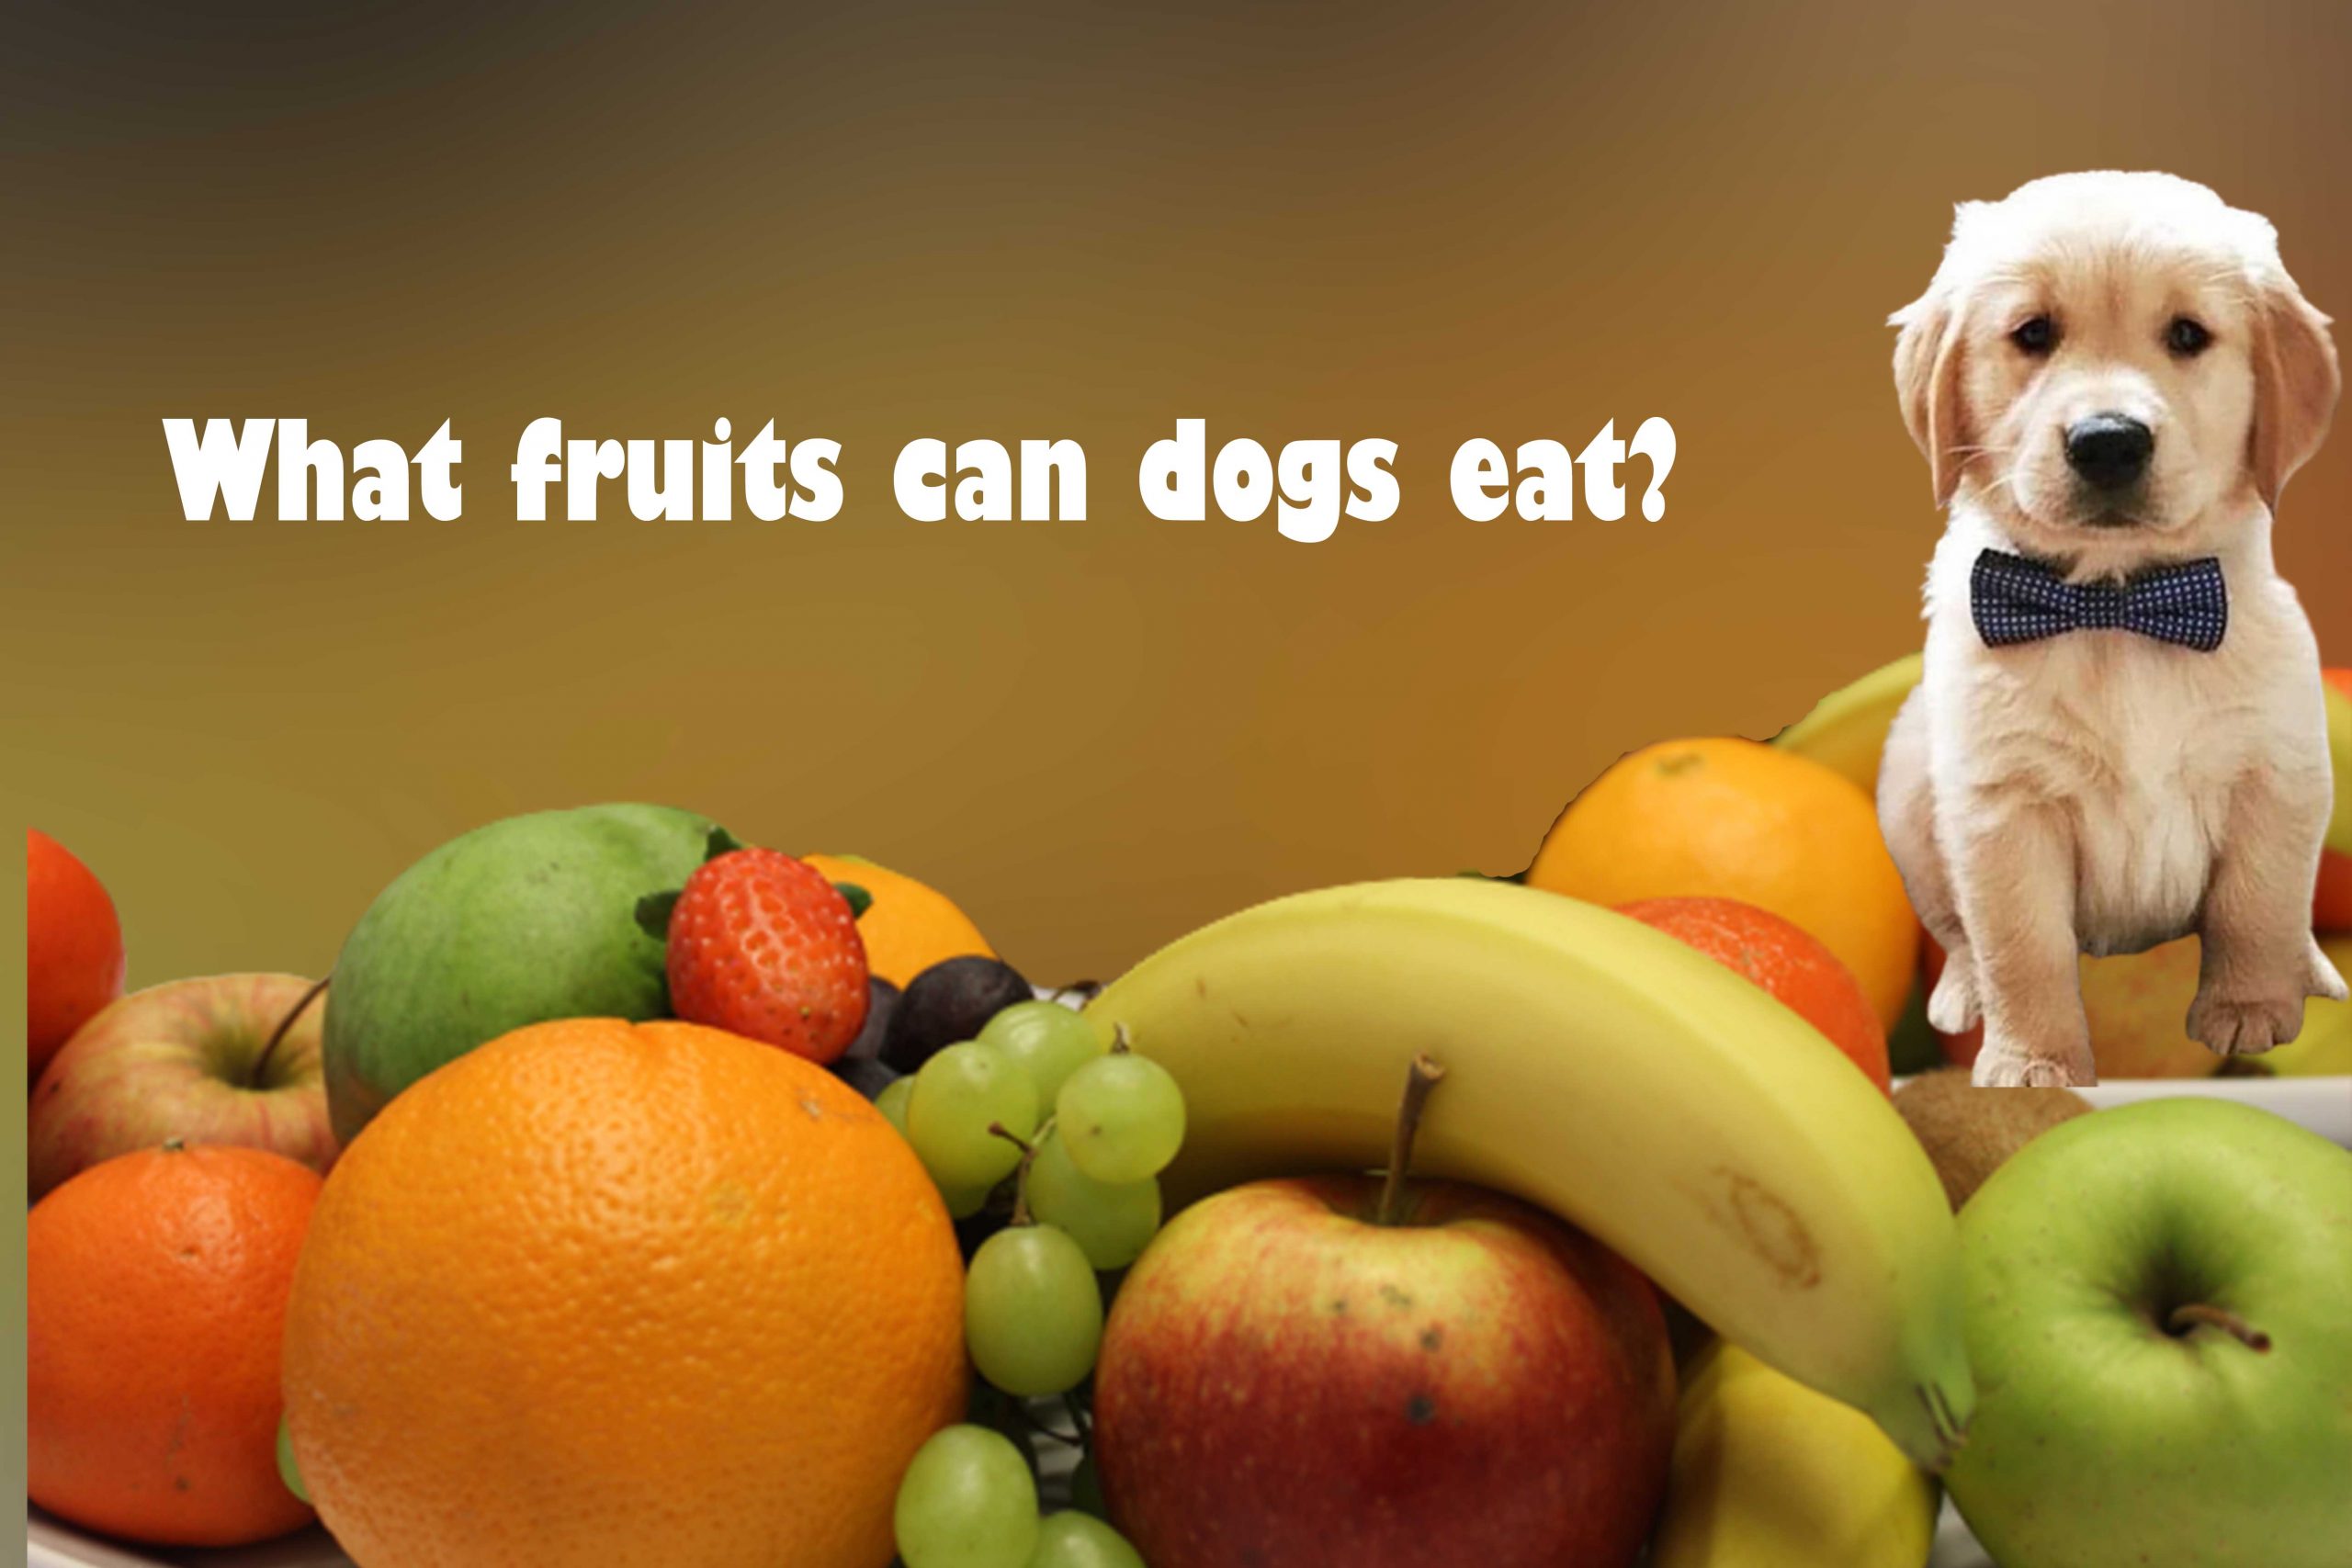 What fruits can dogs eat? What fruits can dogs not eat?